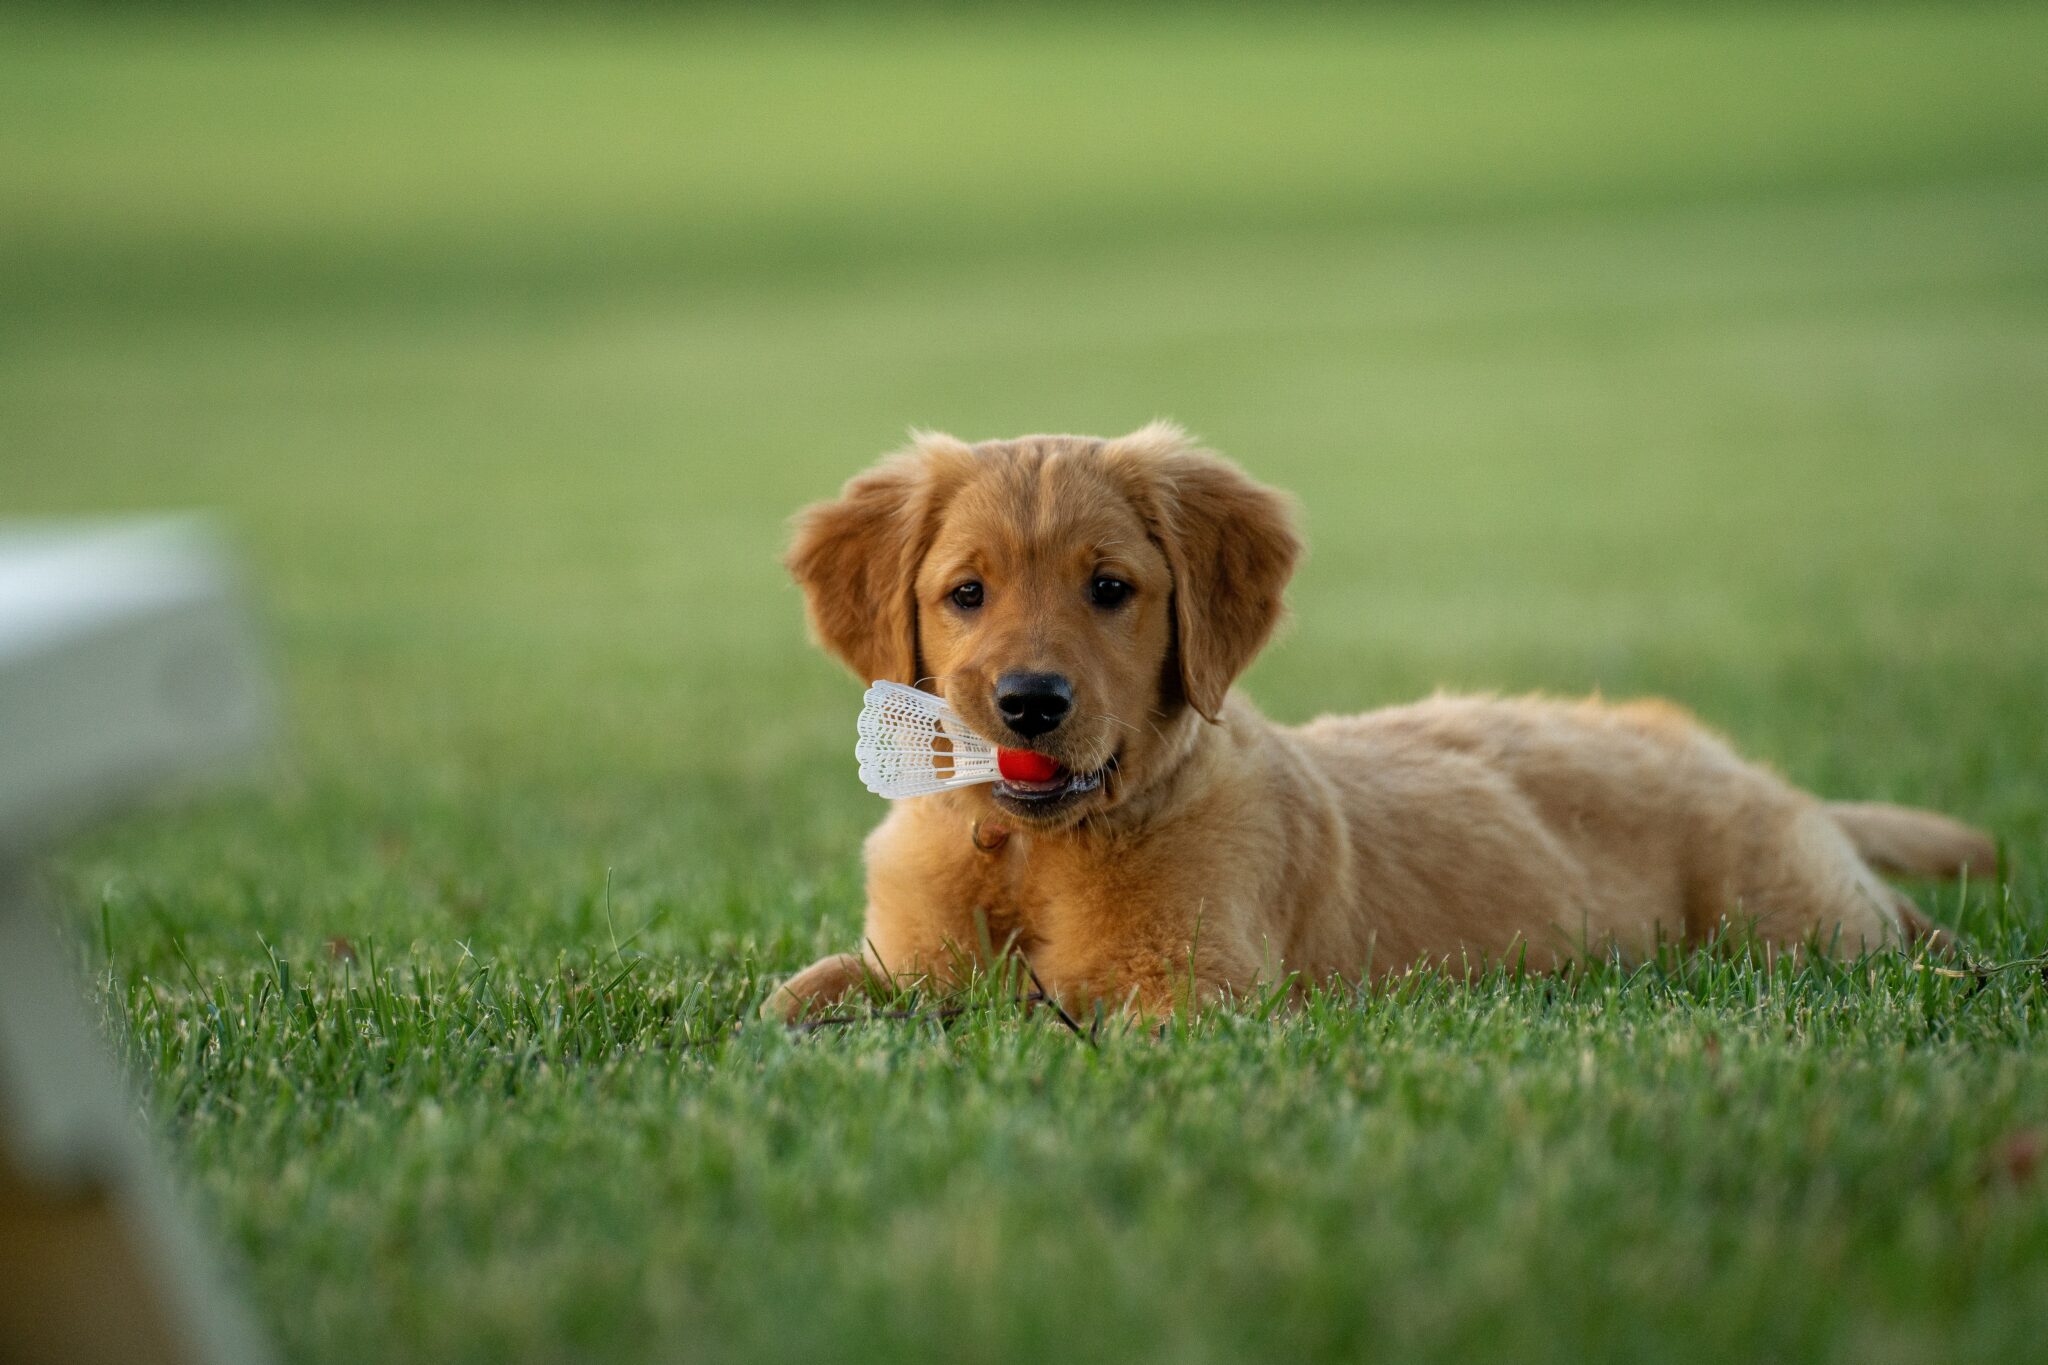 Puppy holding a badminton birdie in its mouth